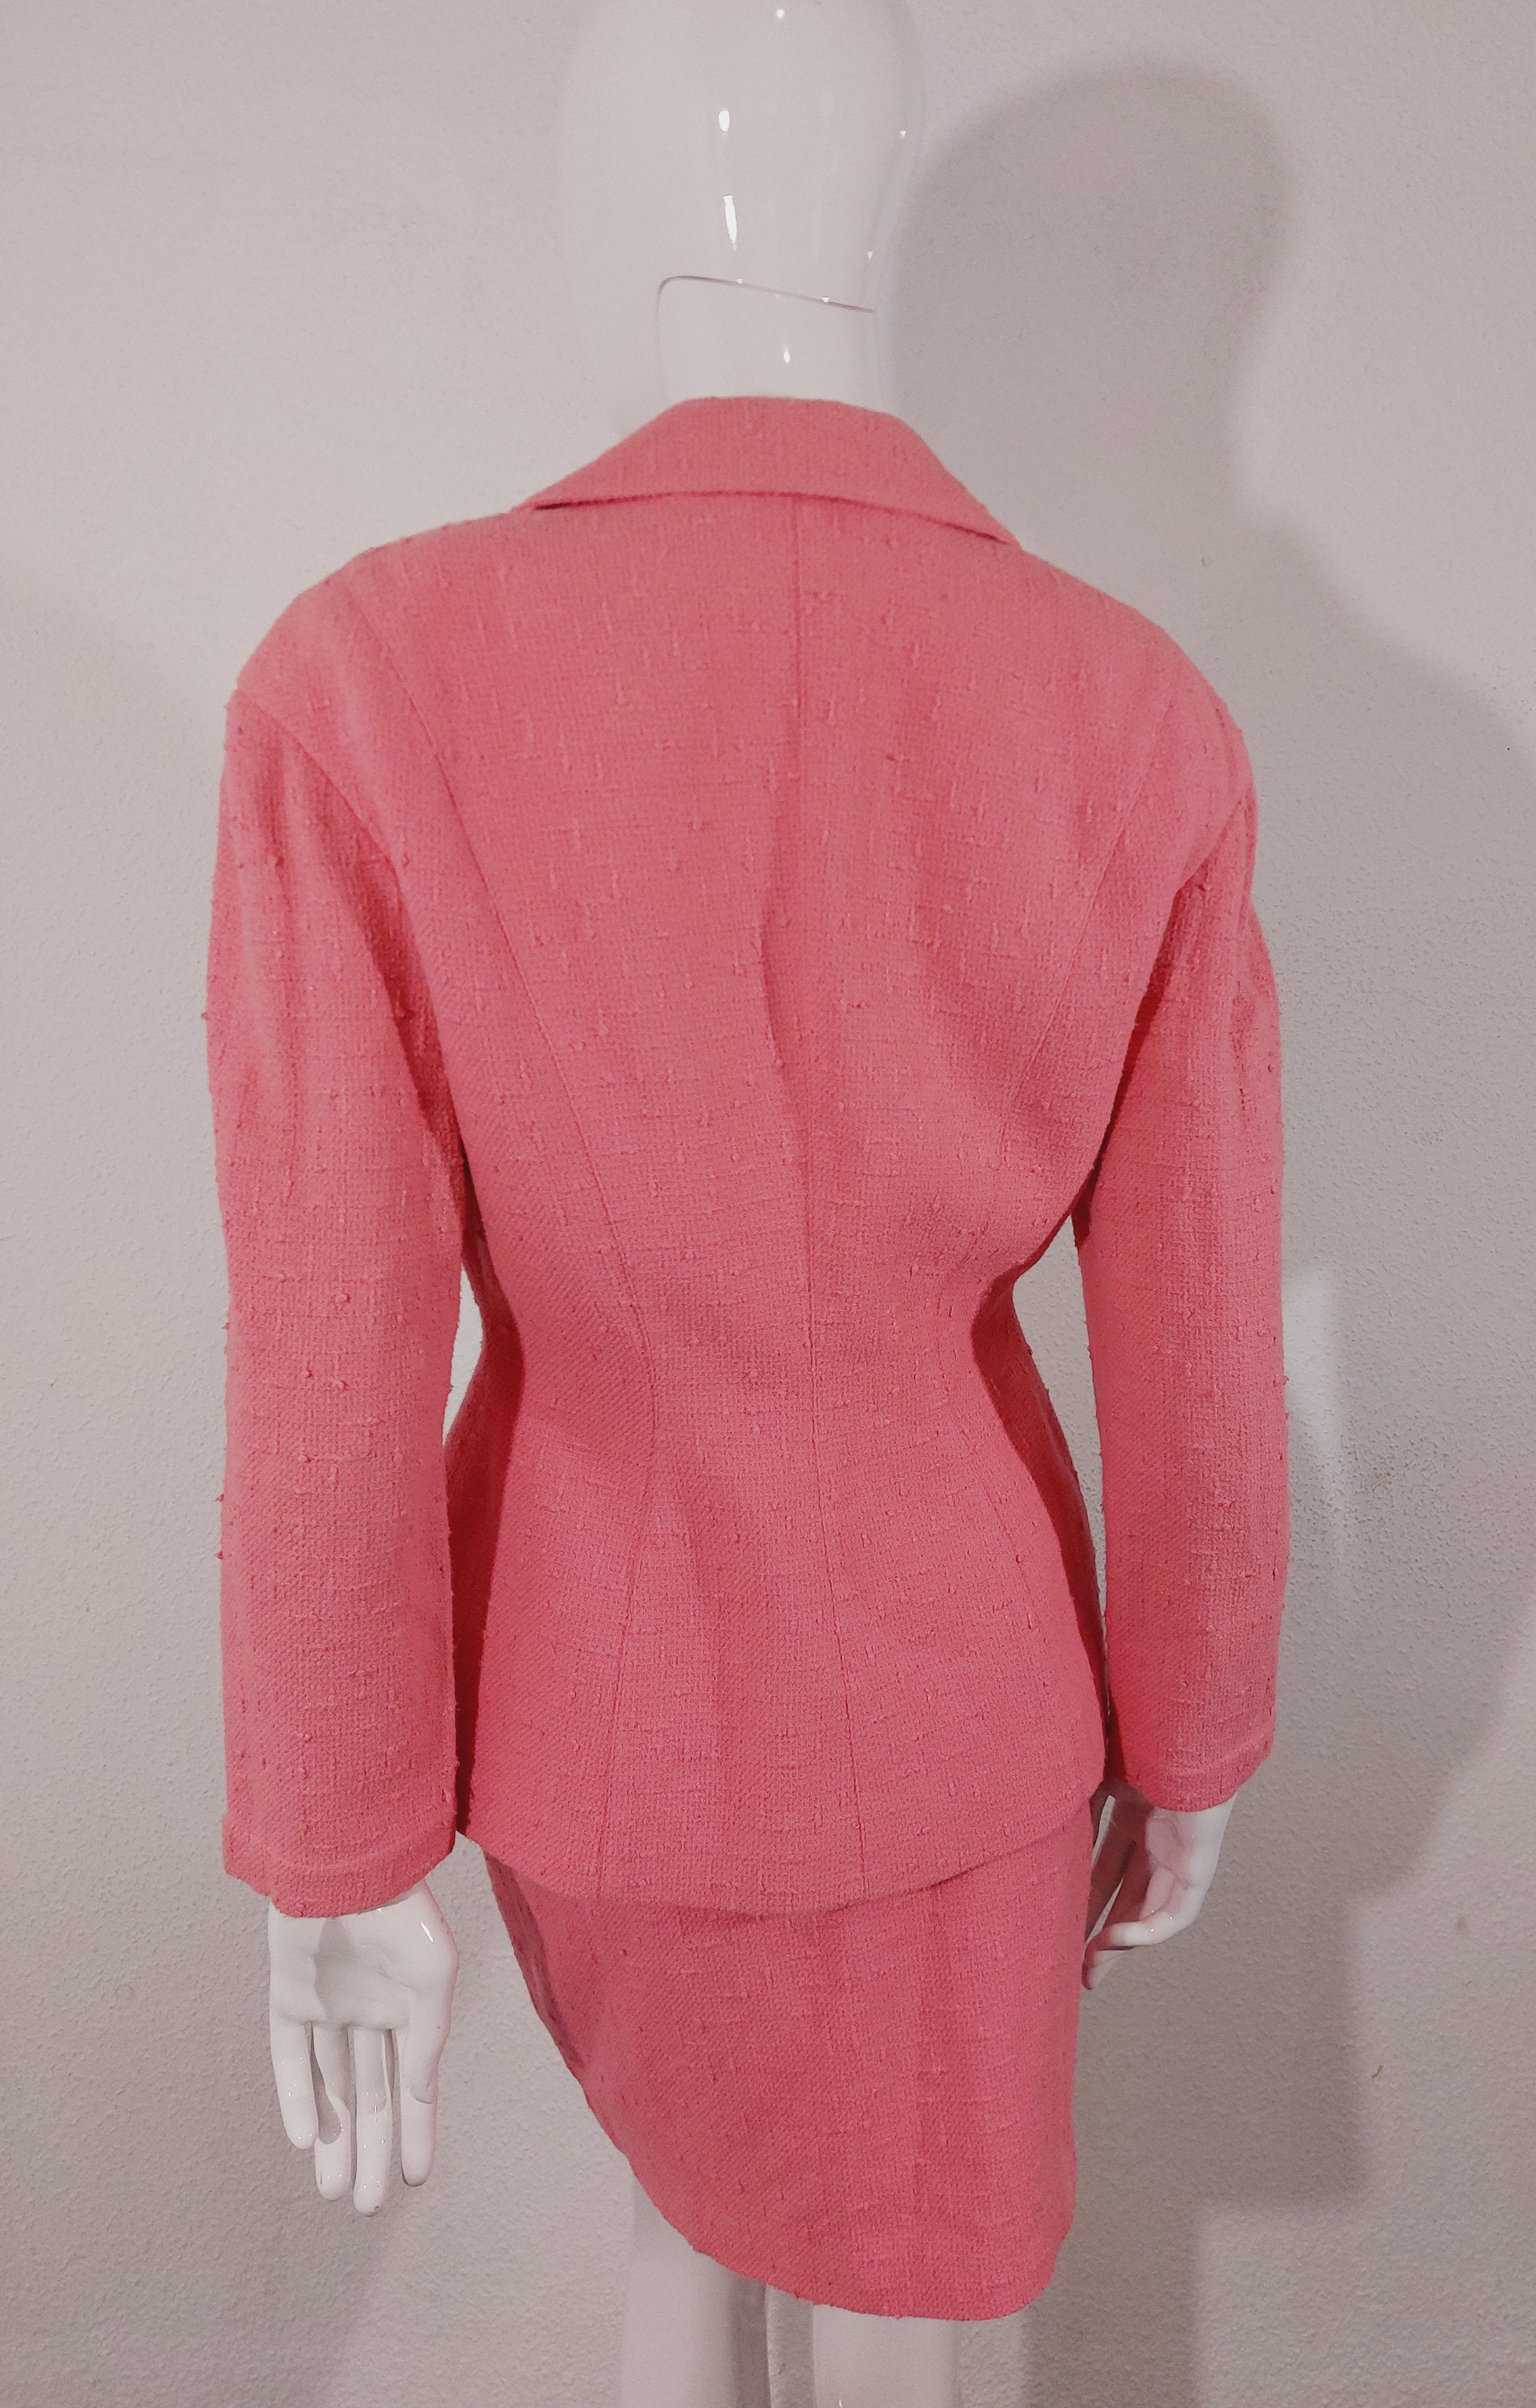 Thierry Mugler Couture Brooch FW 1990 Pin Pink Badge Blazer Skirt Suit Set For Sale 11